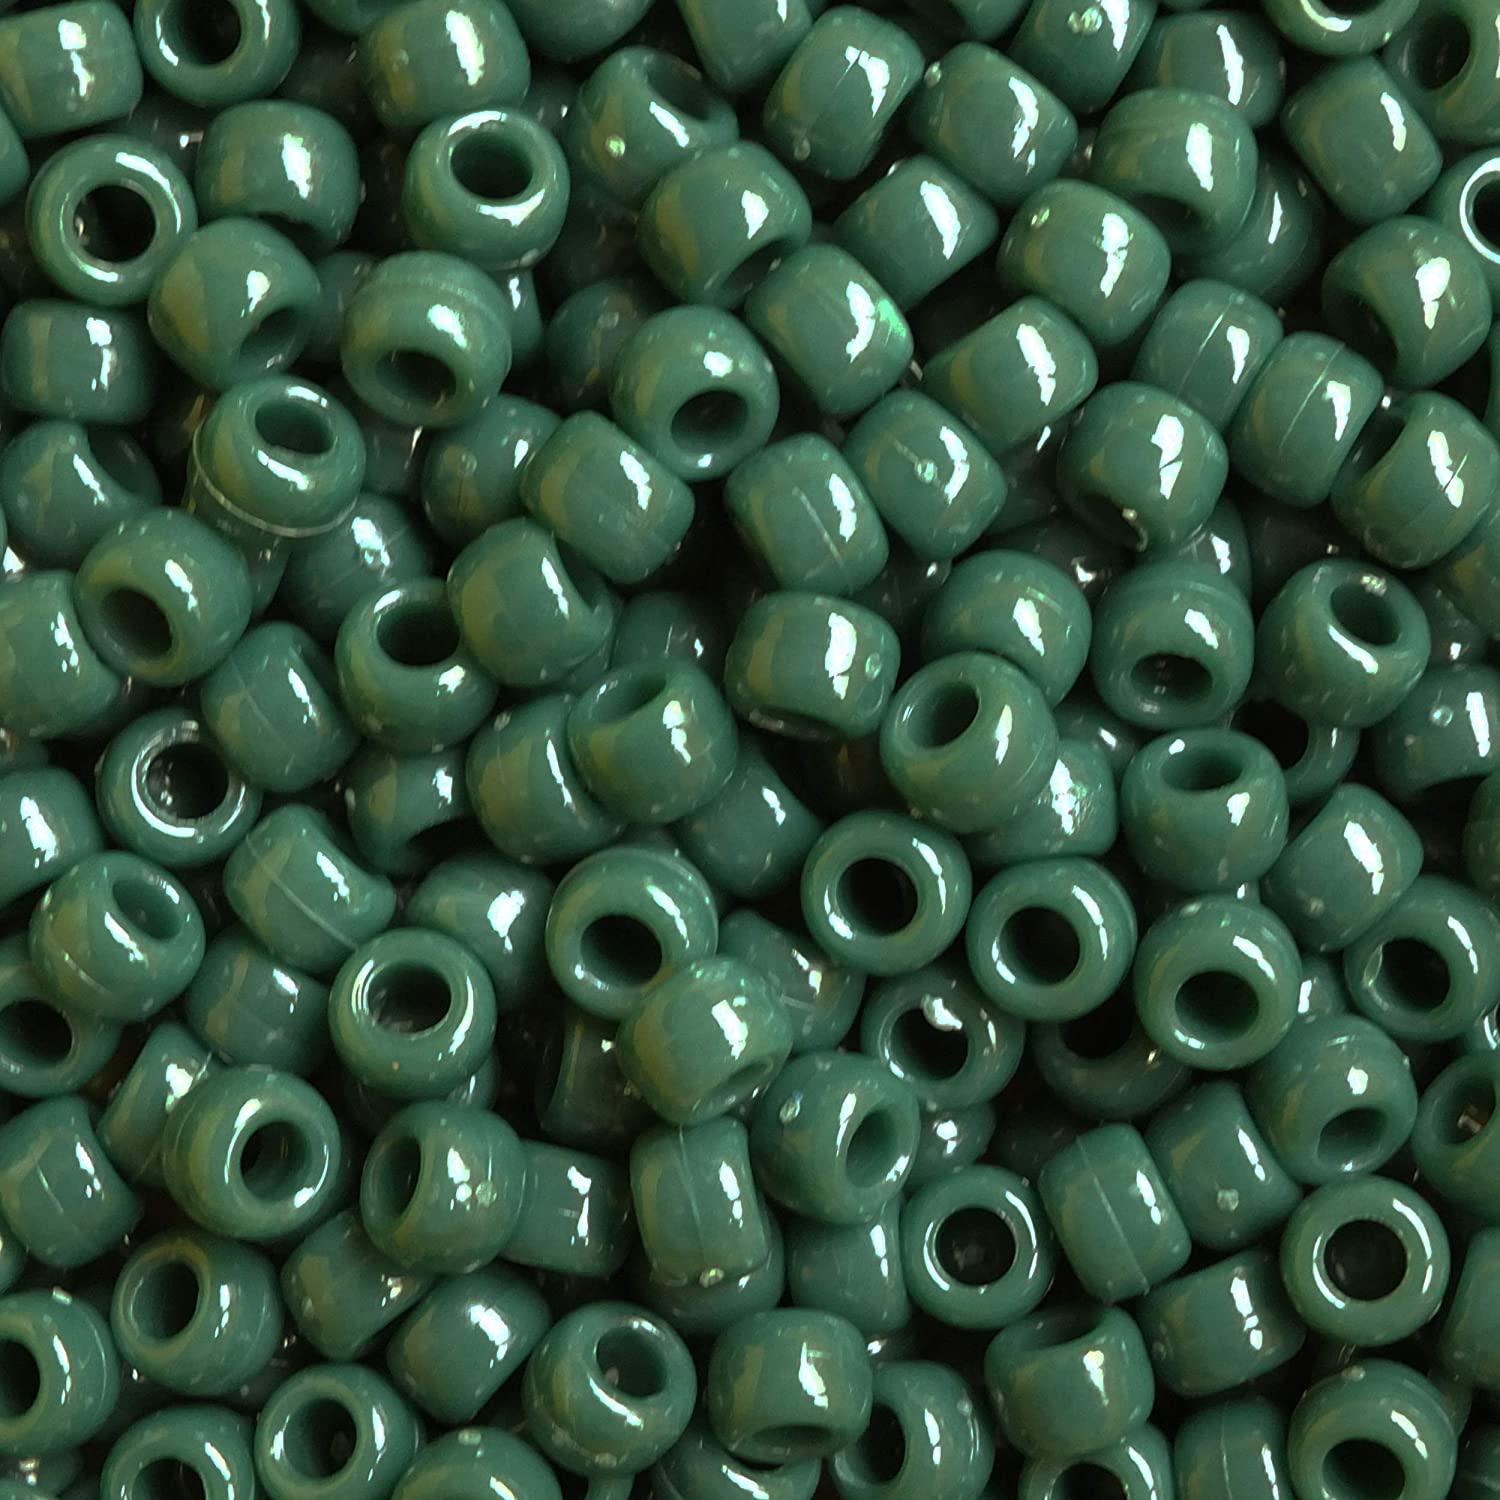 Opaque Hunter Green 7x4mm Mini Pony Beads 1000pc Made in USA